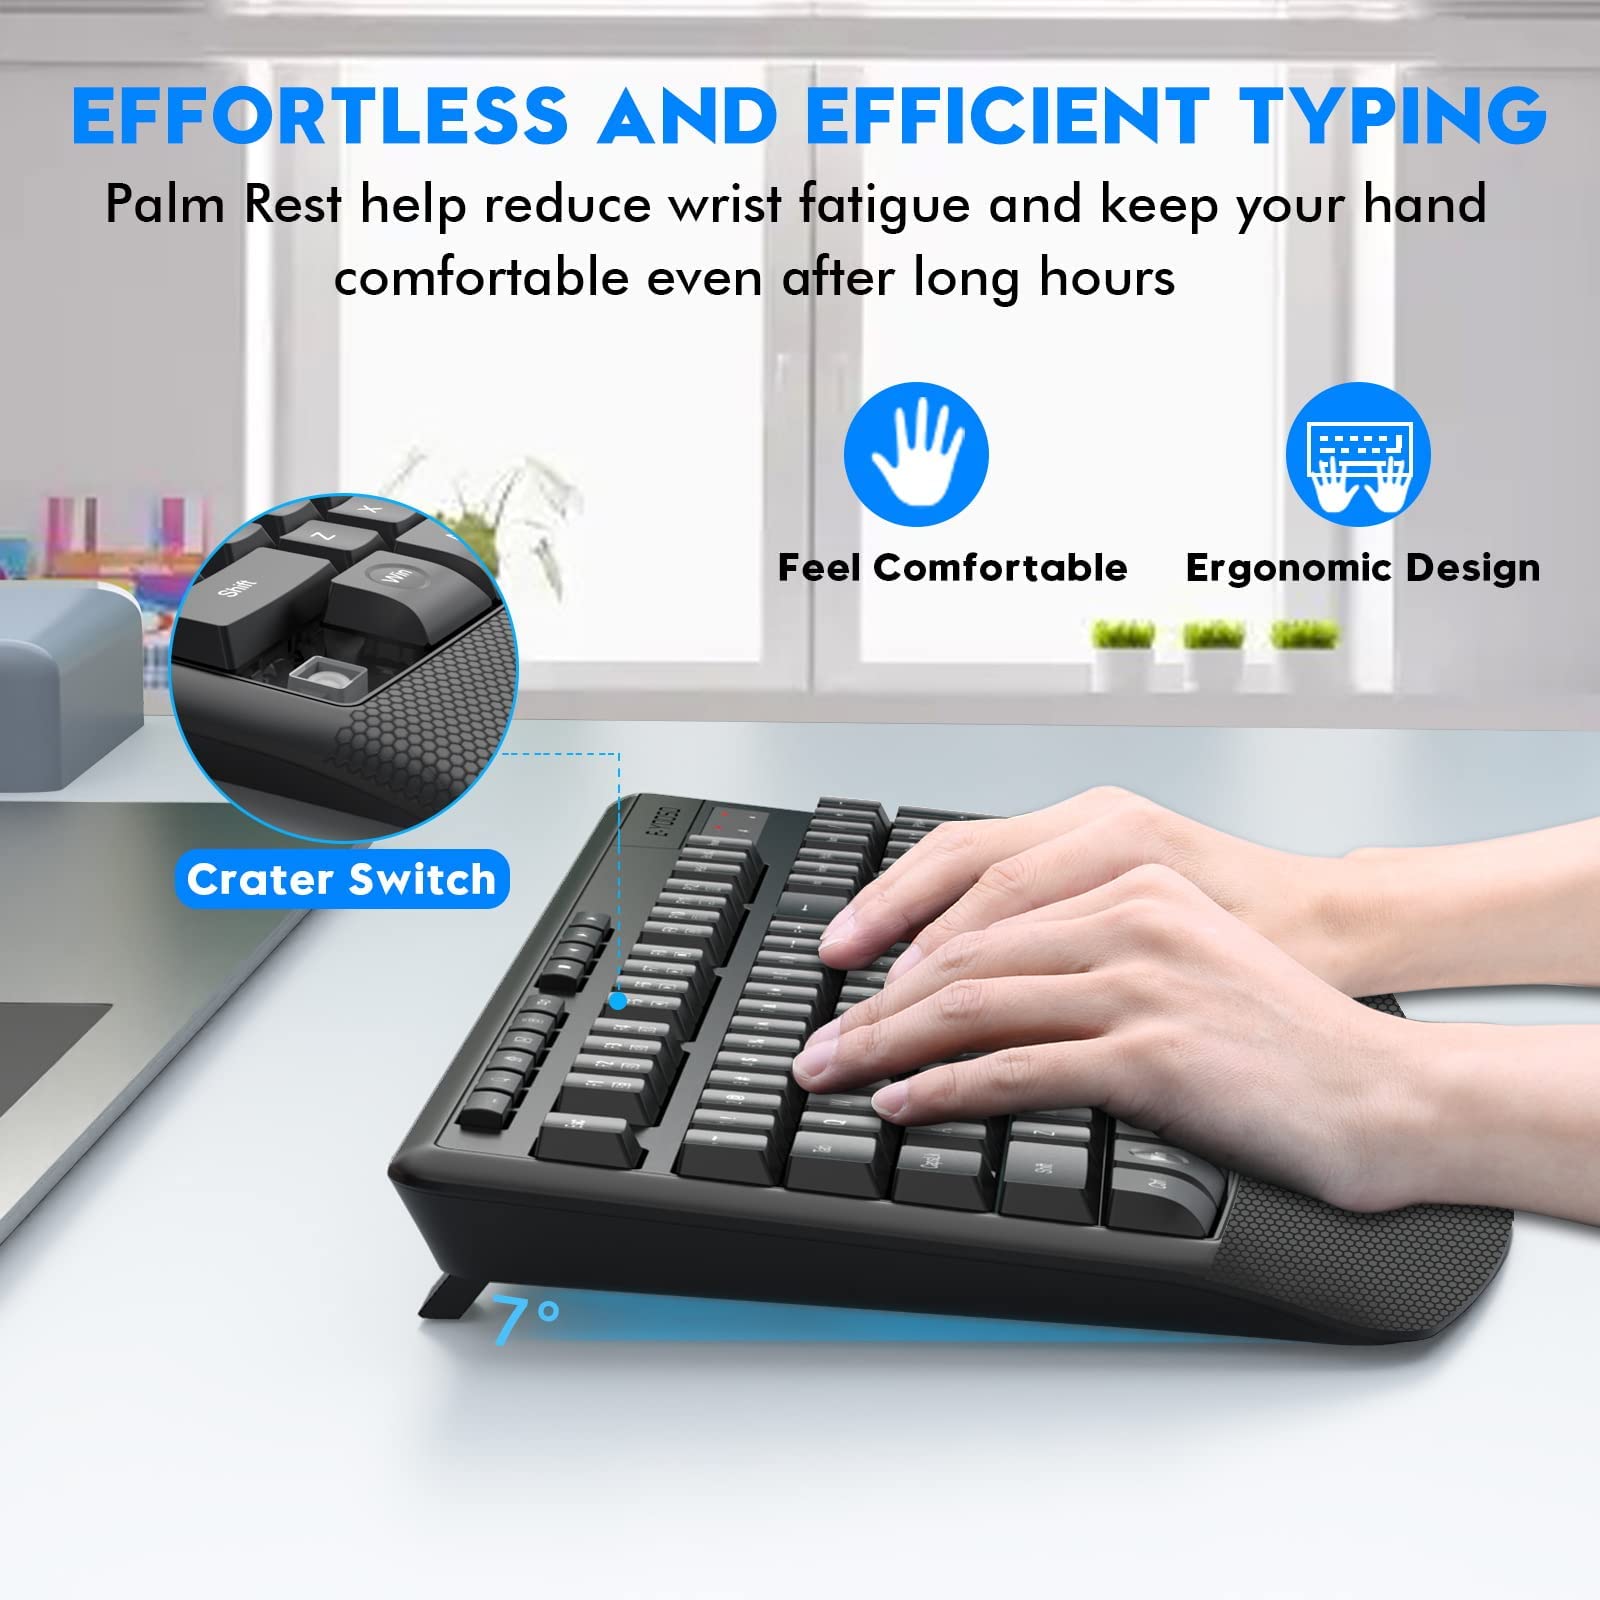 Wireless Keyboard and Mouse Combo, E-YOOSO 2.4GHz Full-Sized Ergonomic Wireless Keyboard with Wrist Rest, 3 DPI Adjustable and 6 Buttons Cordless USB Mouse for Computer, Laptop, PC, Windows, Mac